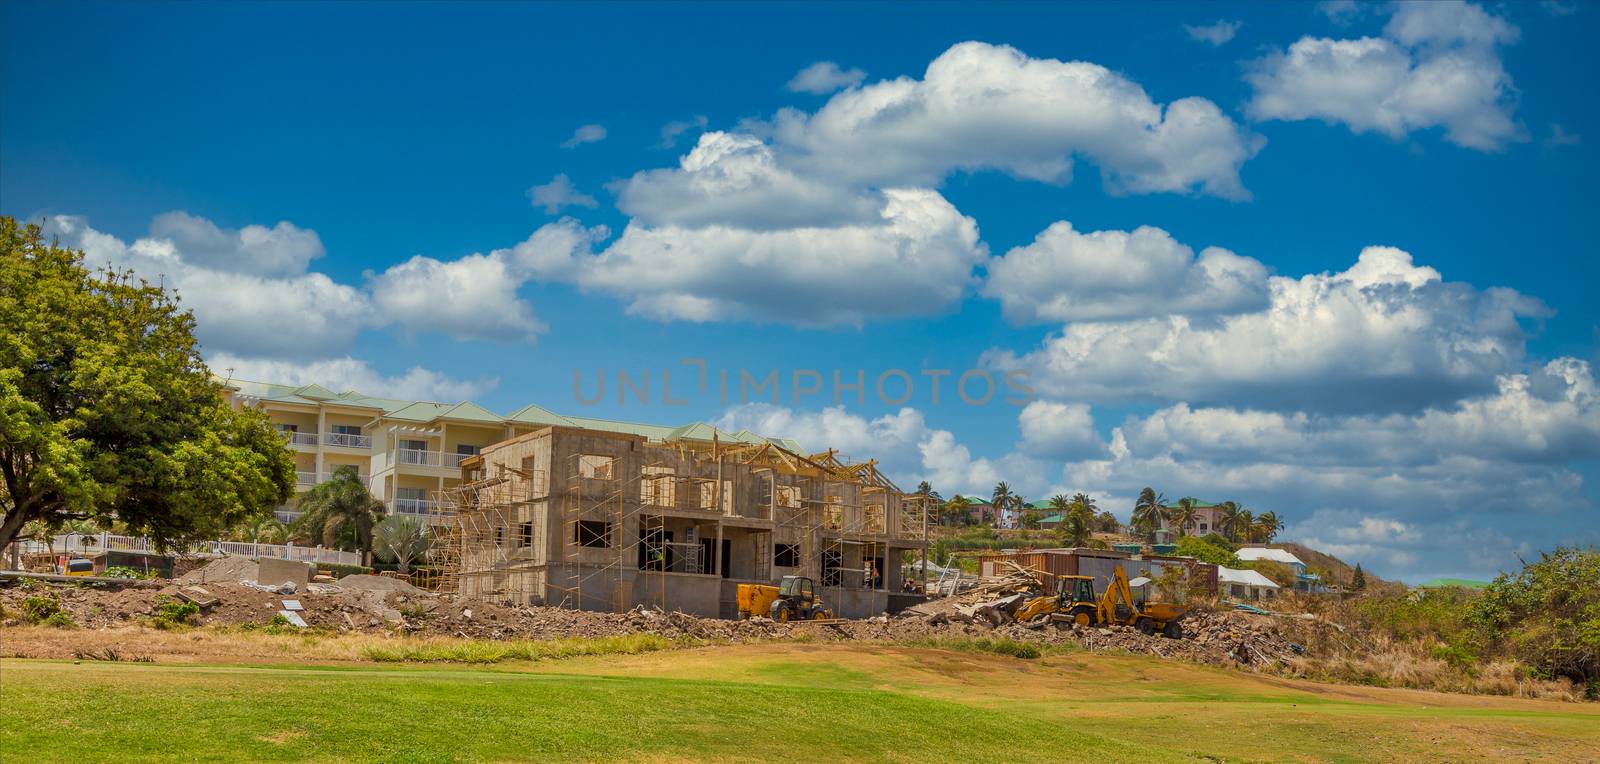 Hotel or Condo Construction on St Kitts